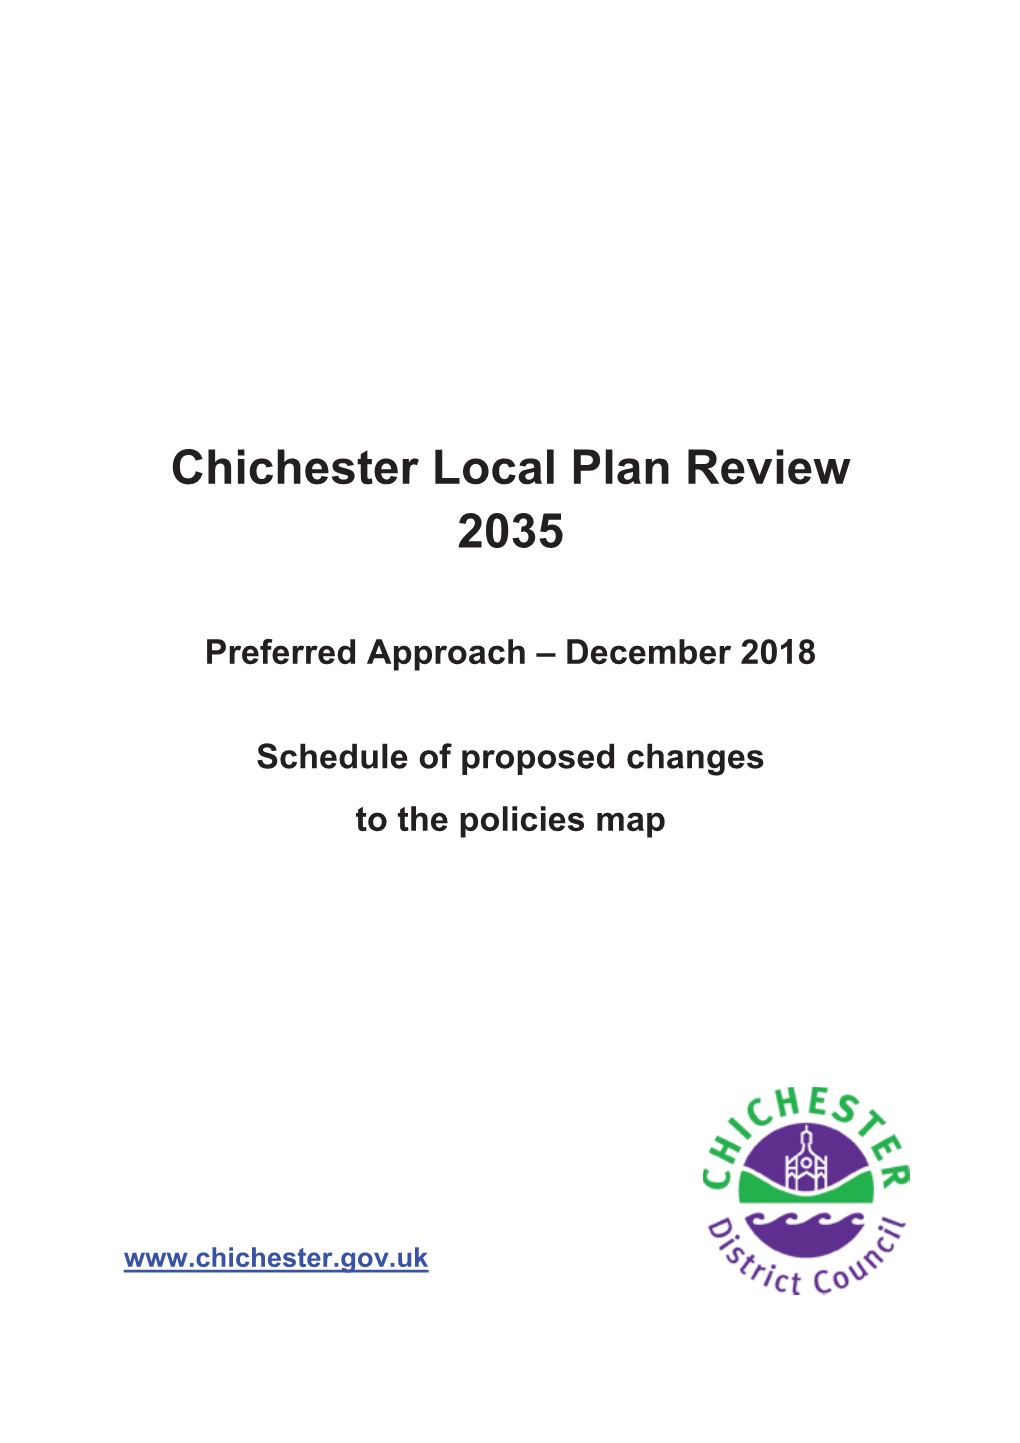 Chichester Local Plan Review 2035